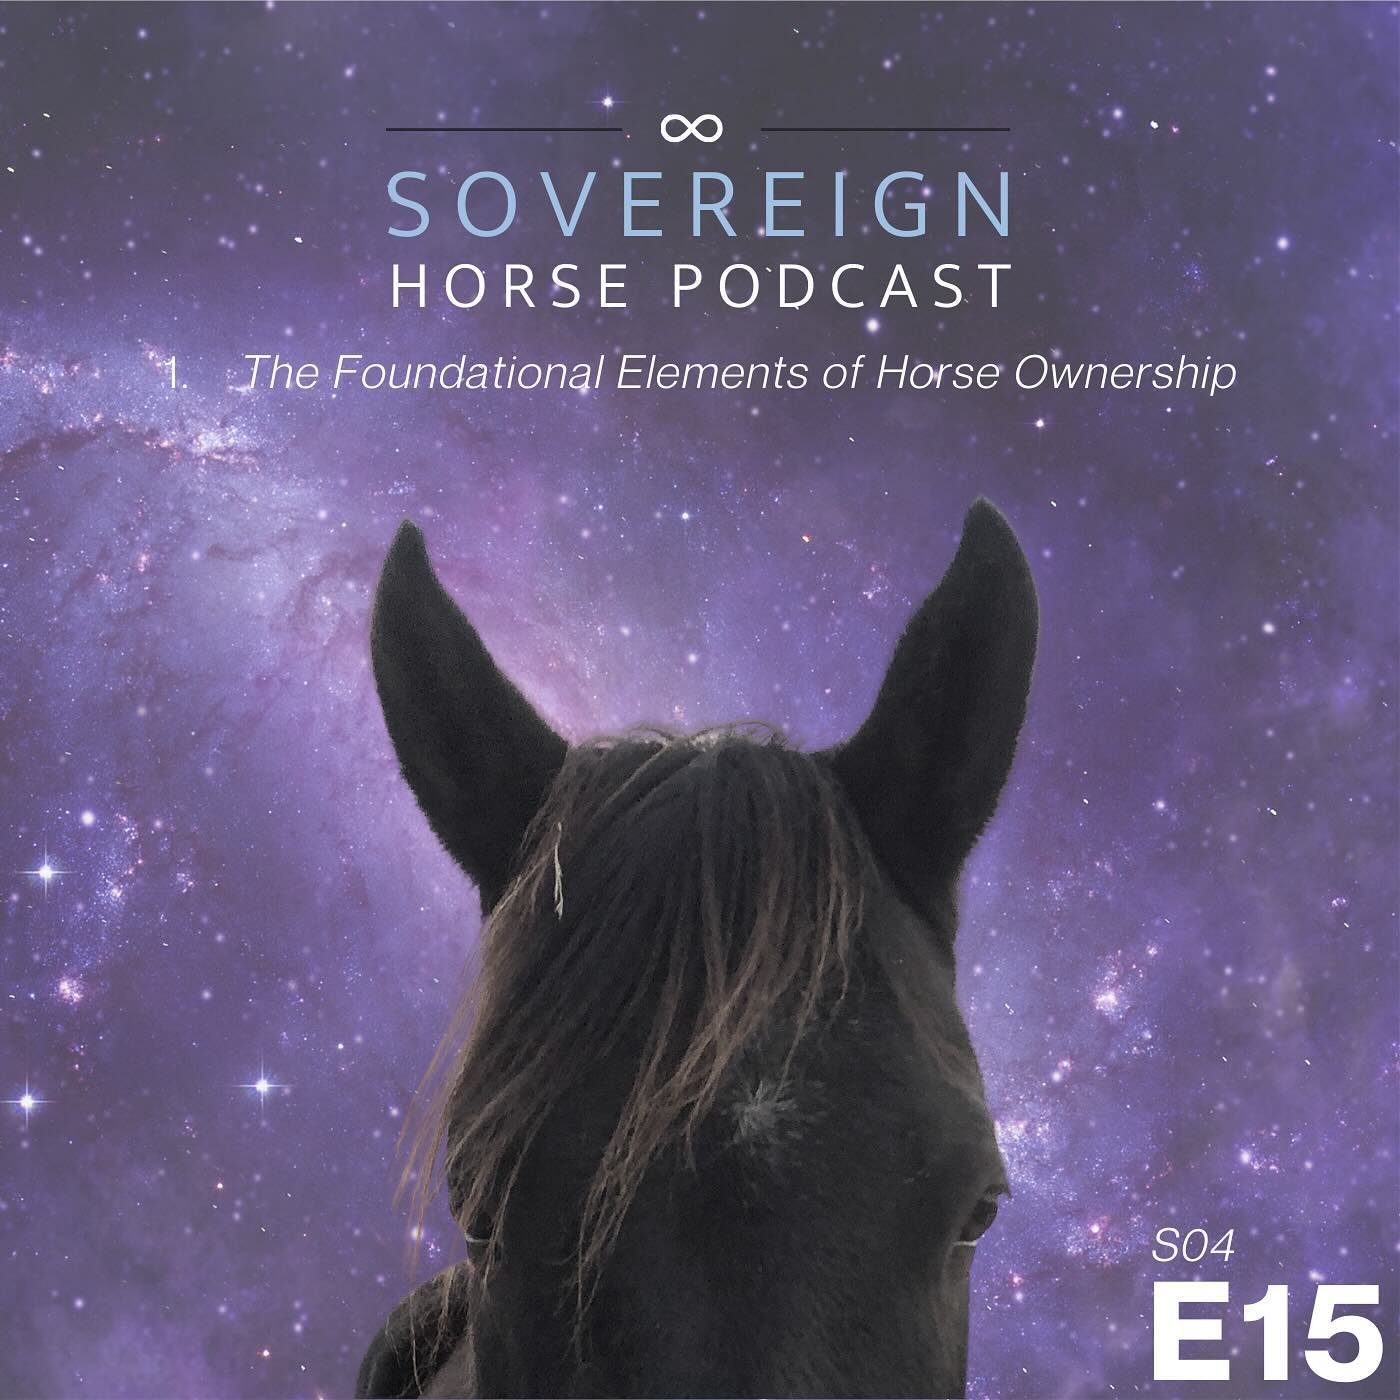 A few months ago I had someone ask me to do an episode for new horse owners. She asked me to cover what I would consider to be the basics when it comes to horse ownership.  
As I have sat in contemplation of this, what I realized is that instead of c